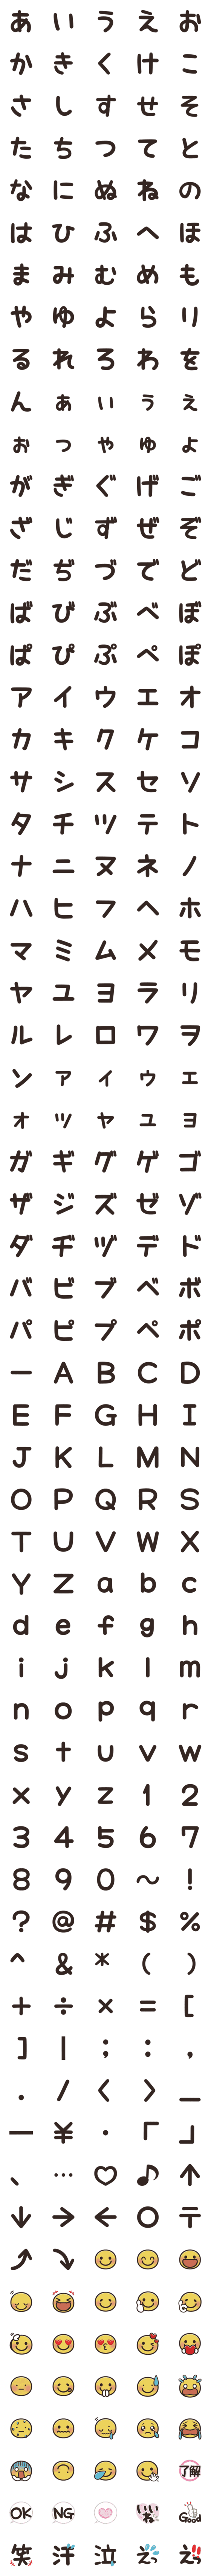 [LINE絵文字]【チョコフォント】丸文字♡手書きの画像一覧